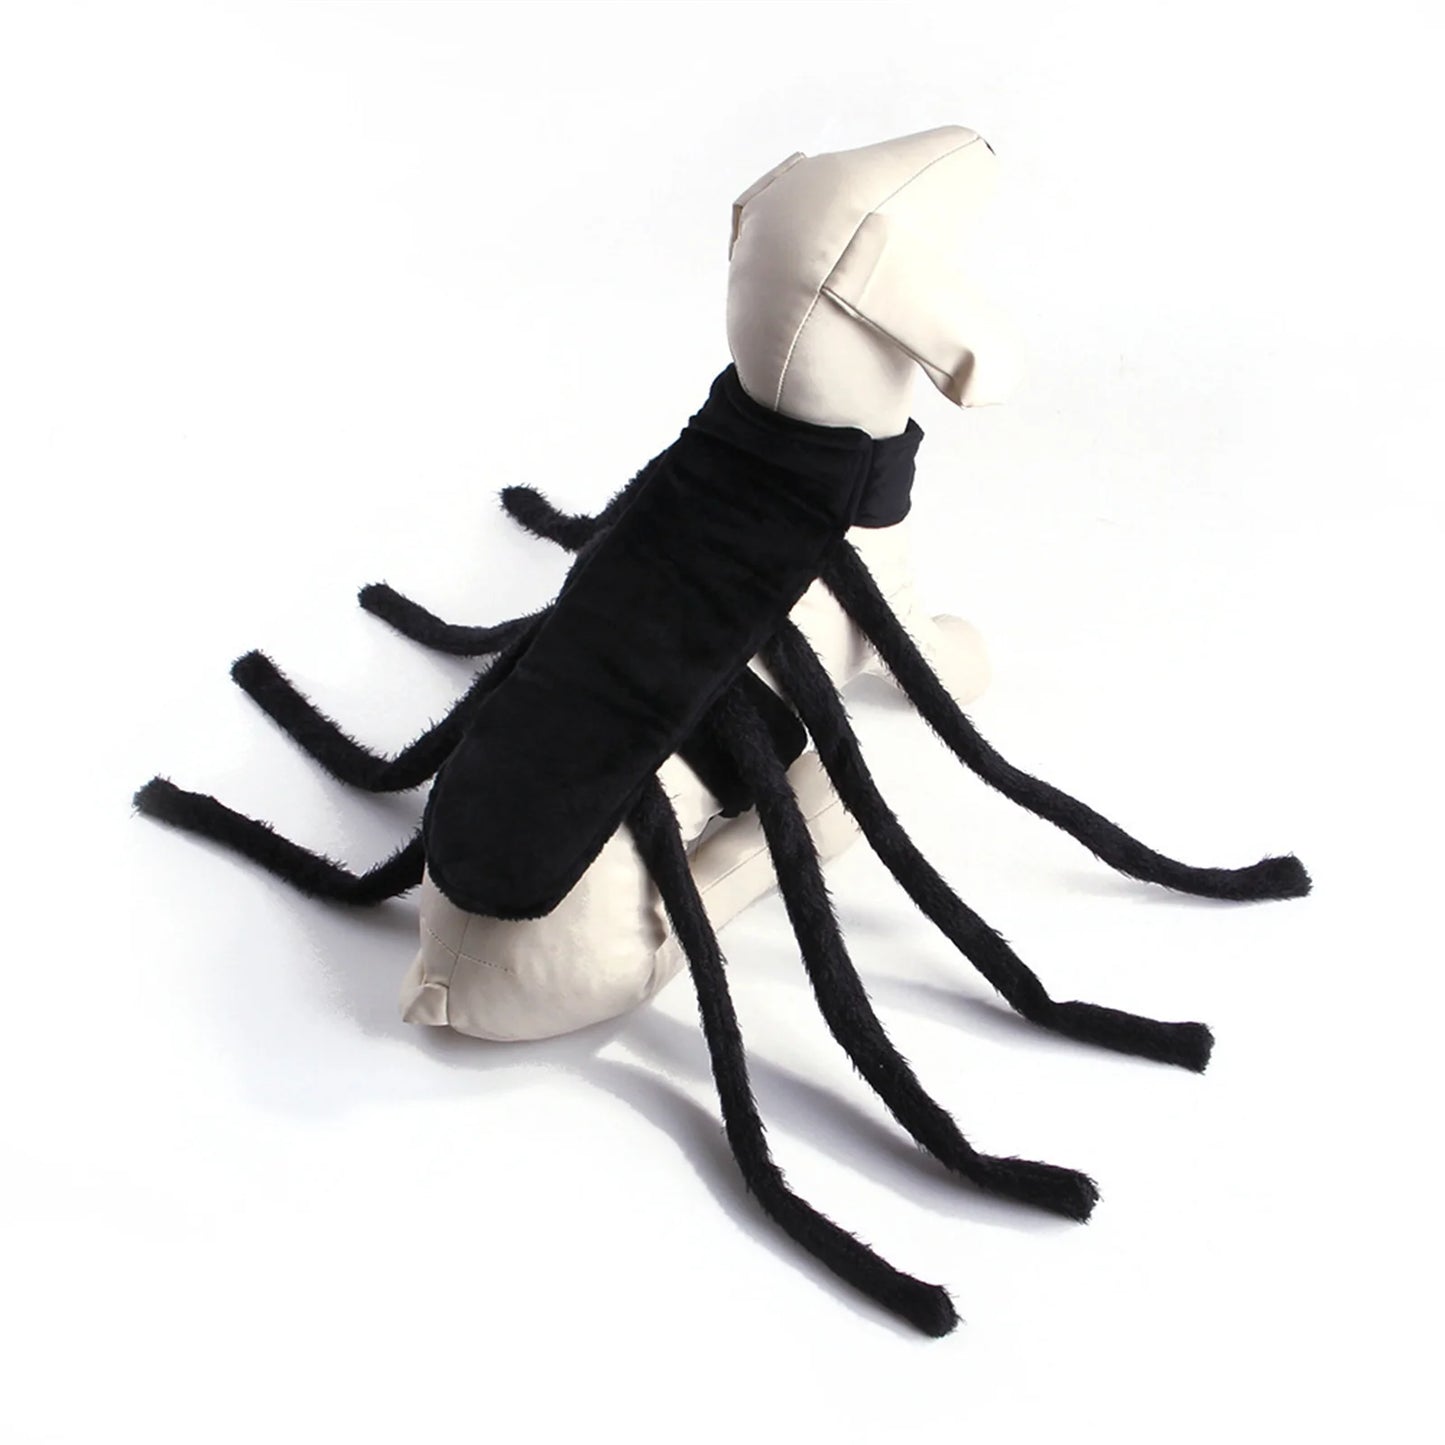 Pet Accessories - Halloween Costume - Pet Spider Costume for Dogs or Cats